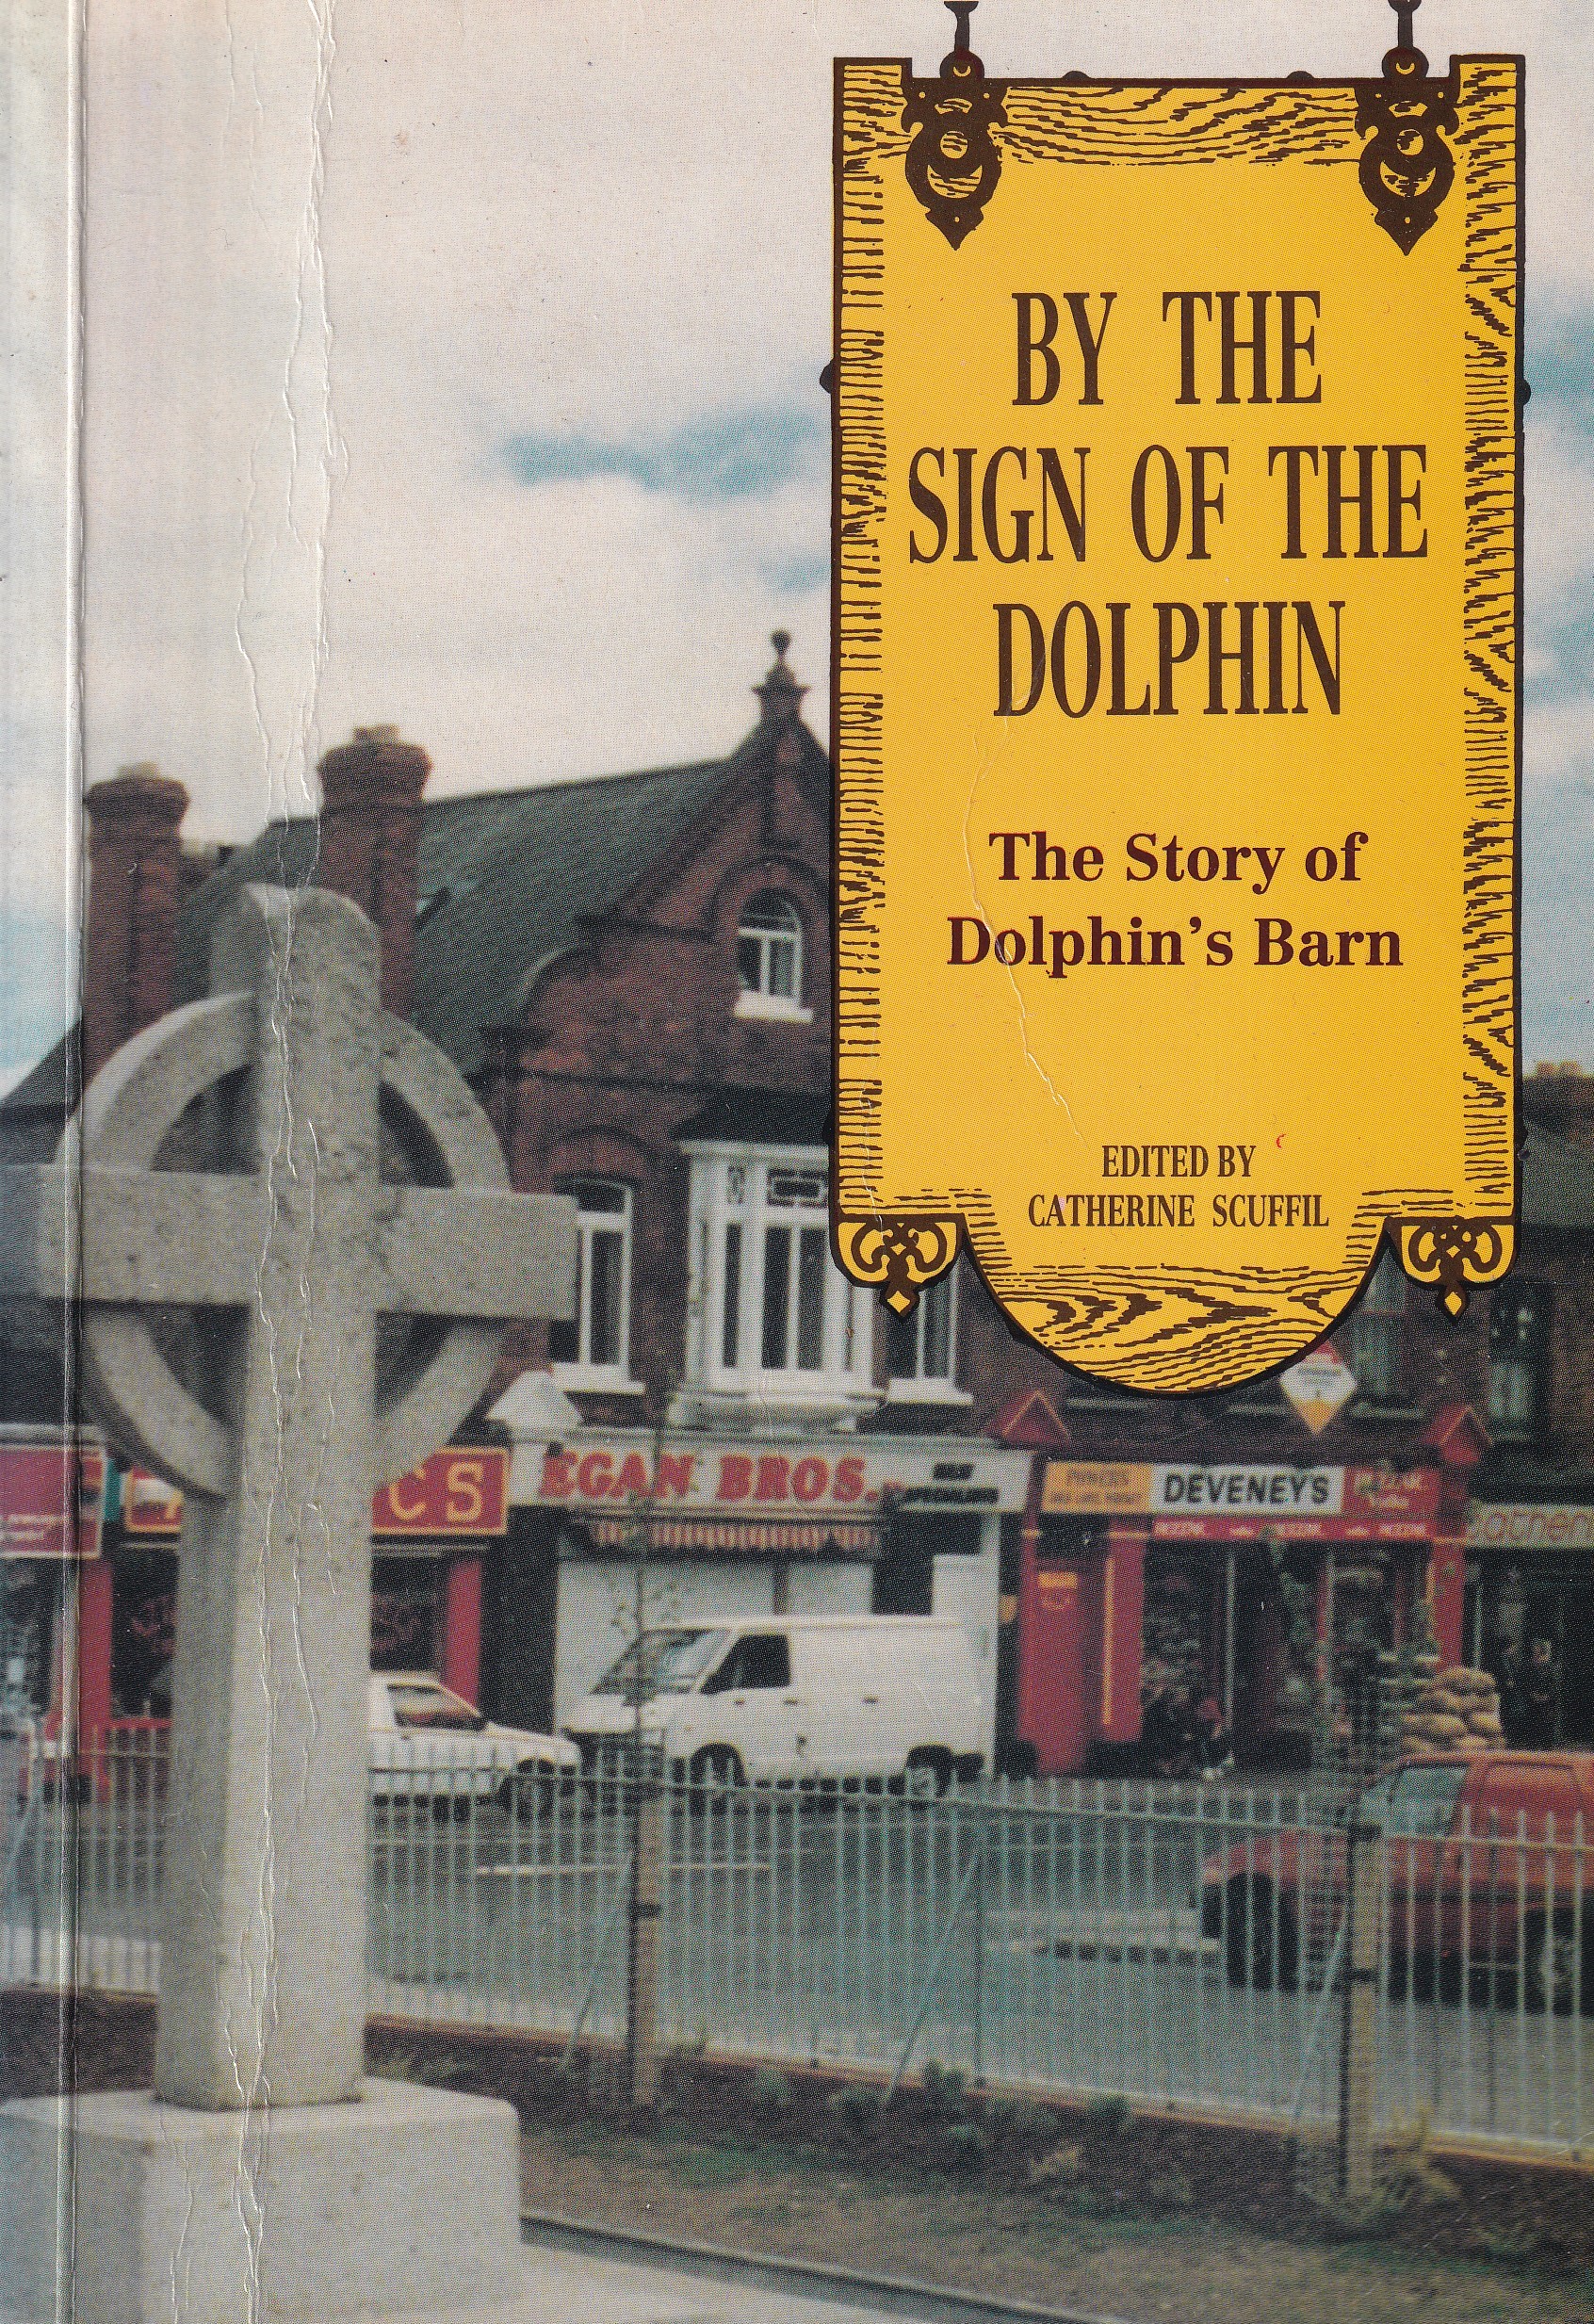 By the Sign of the Dolphin: The Story of Dolphin’s Barn by Catherine Scuffil (ed.)